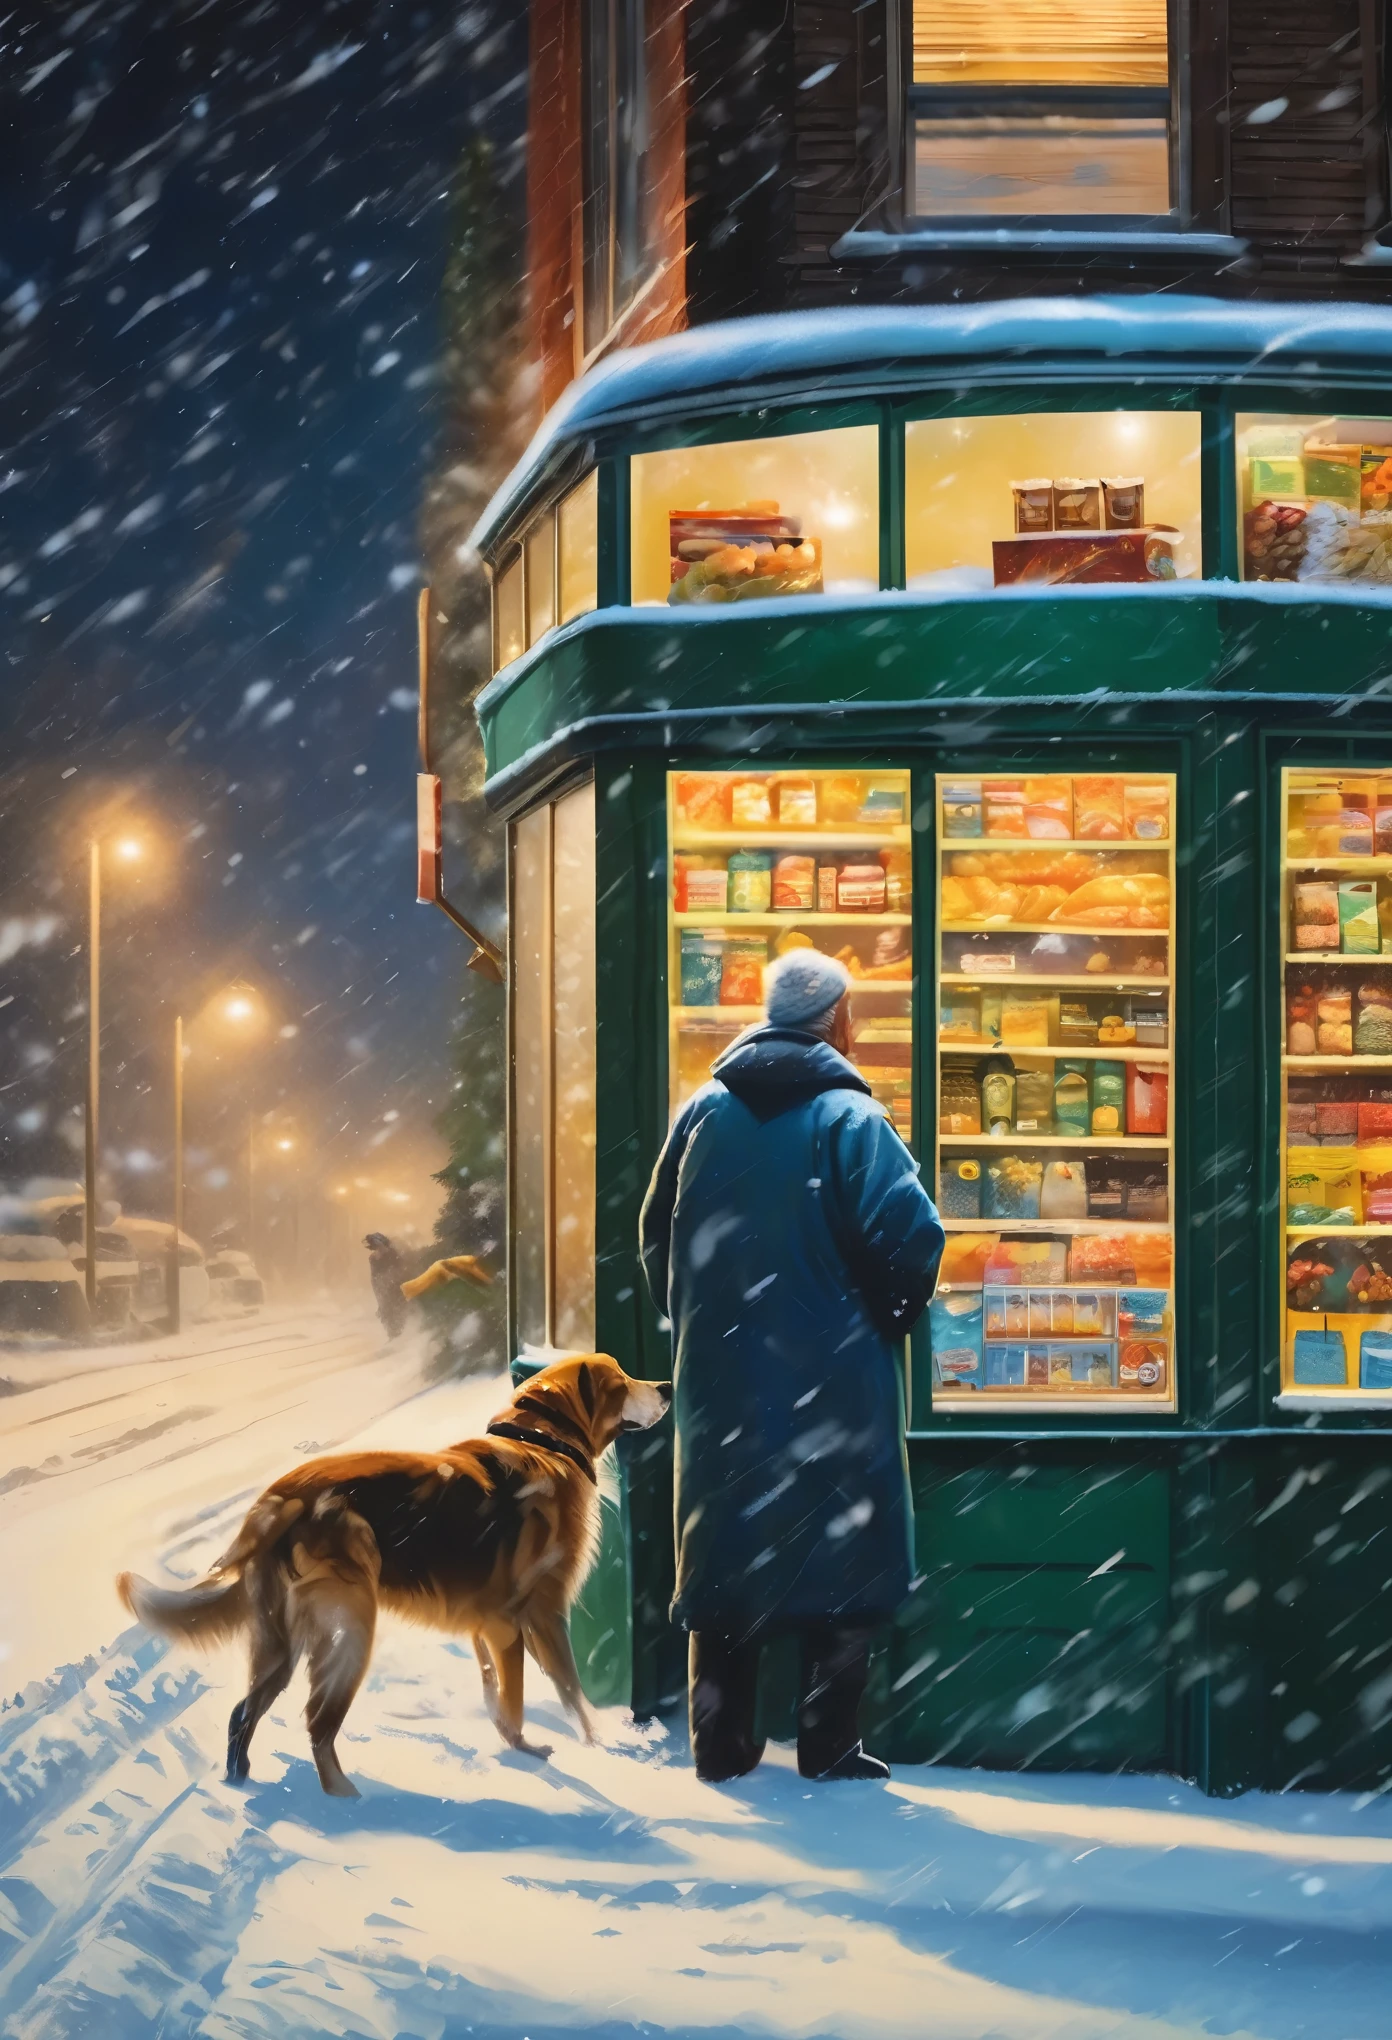 （masterpiece，photography，lifelike，）winter，heavy snow，snow，late night，Convenience store at night，supermarket，Huge glass windows，Old man and dog in the window，Bus stops